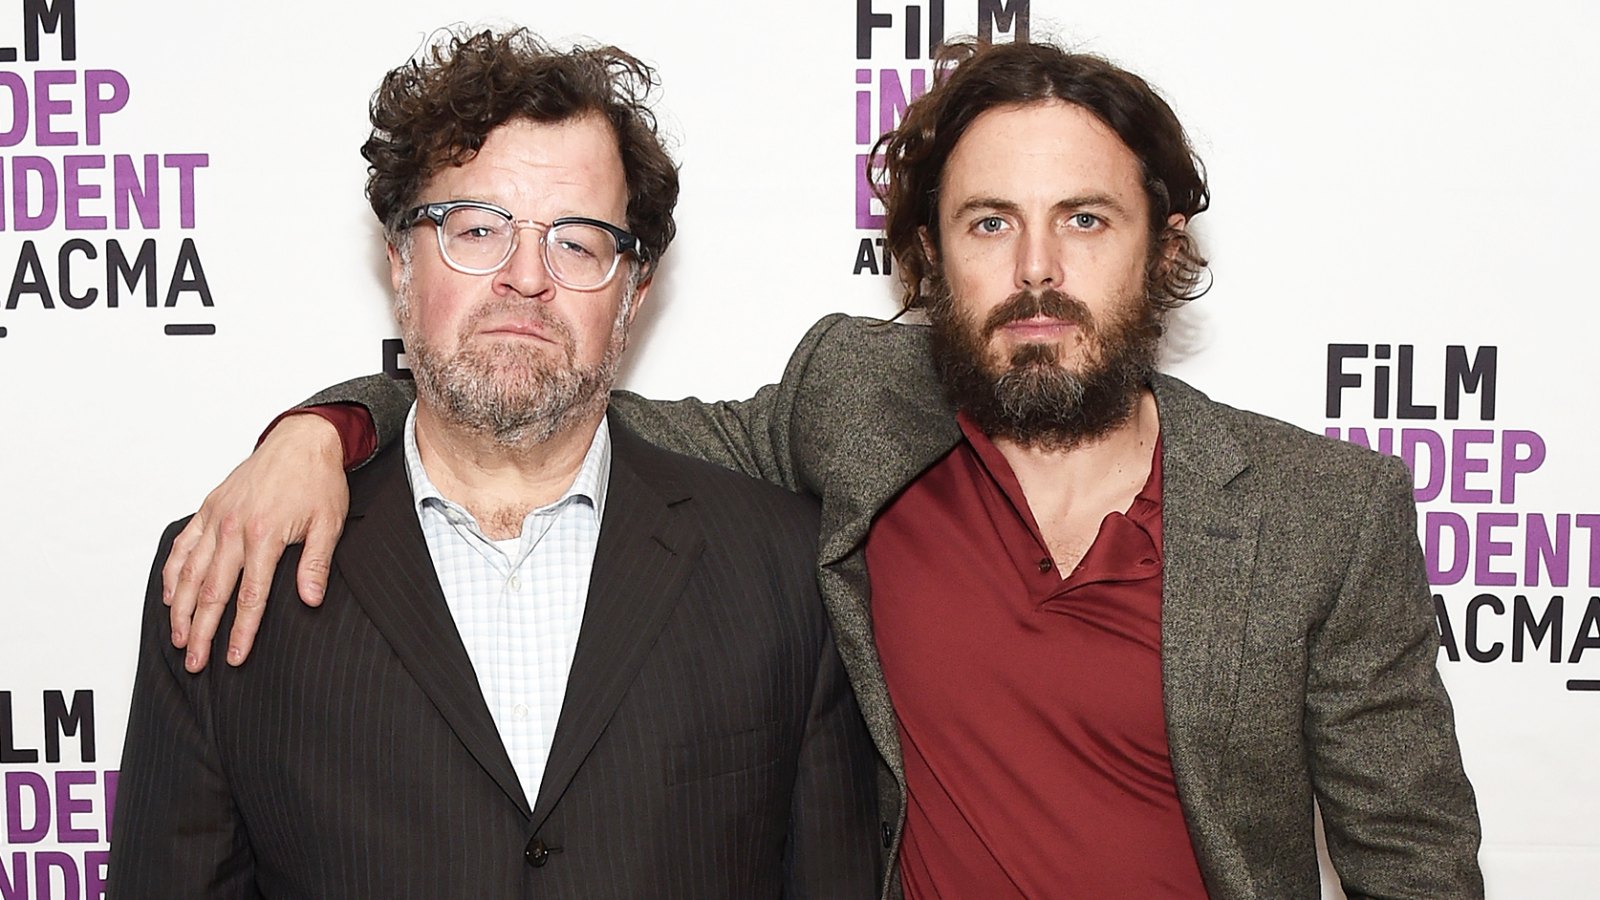 Kenneth Lonergan Says Casey Affleck Has Been Treated Abominably Amid #MeToo Movement